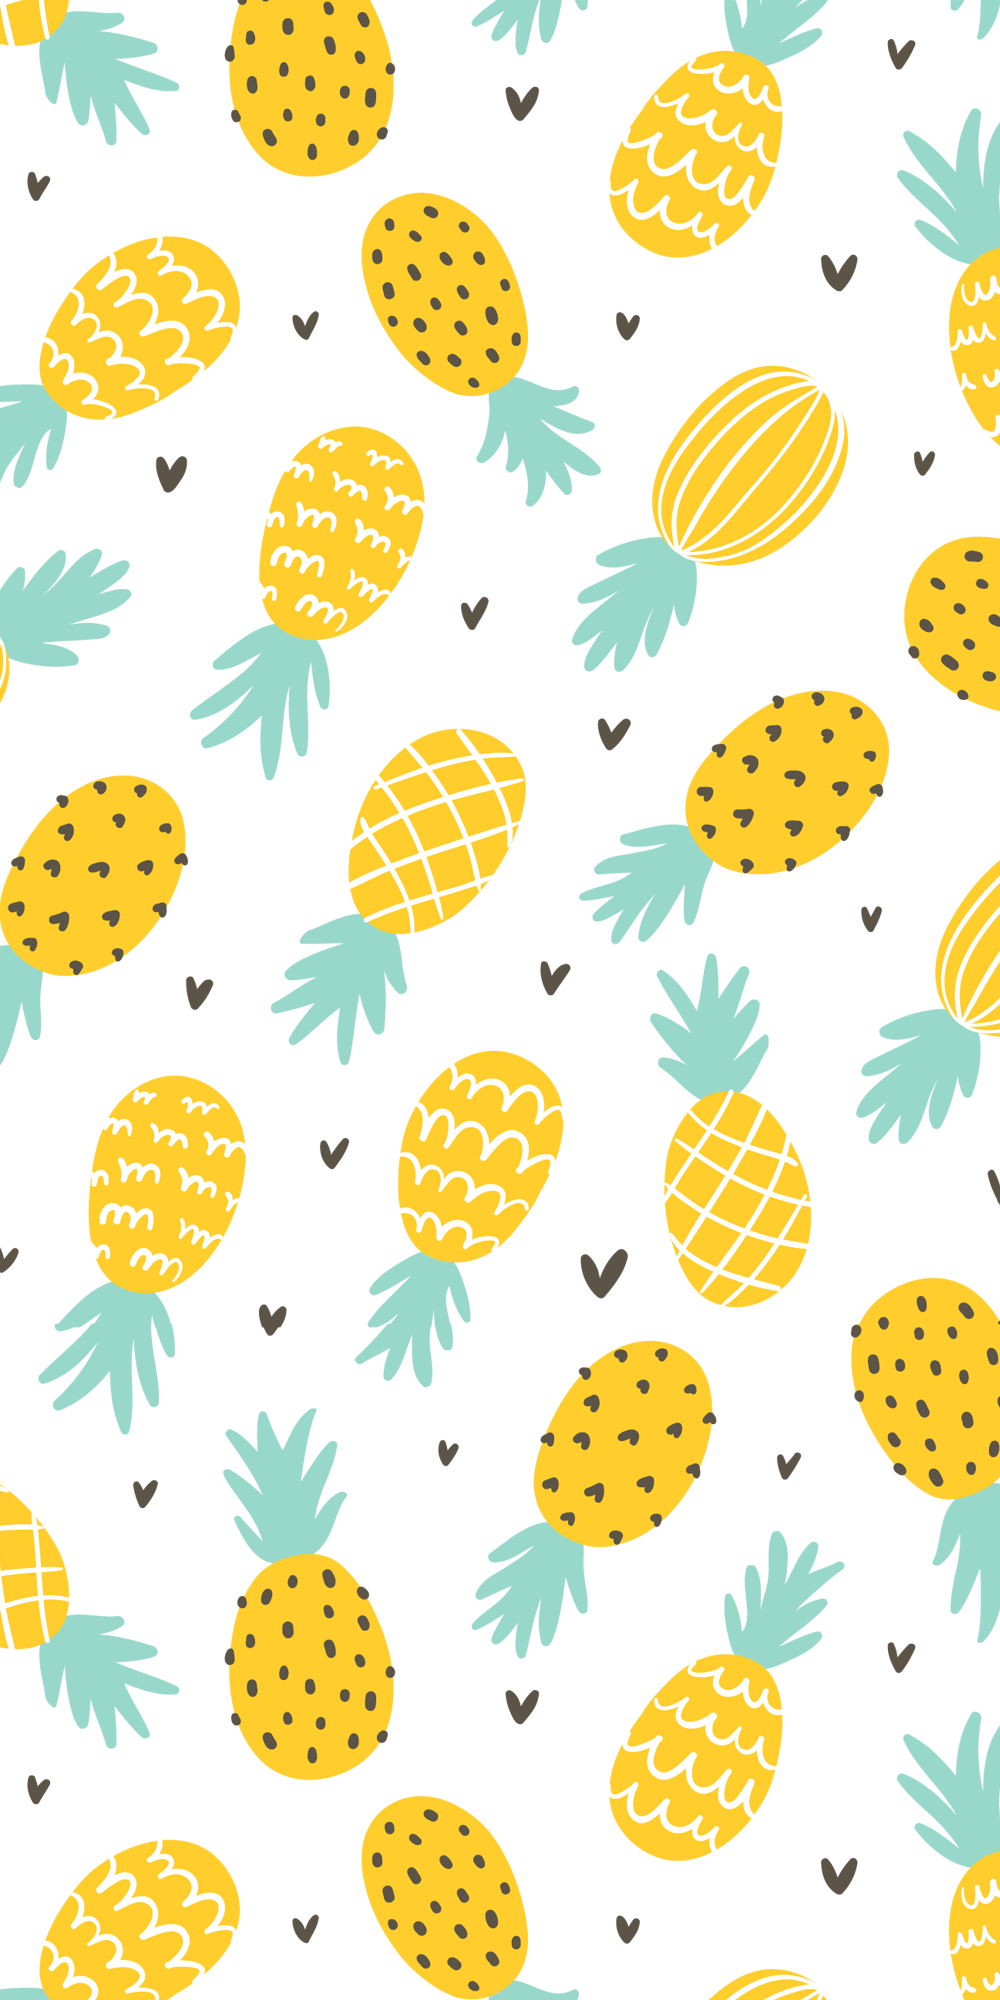 Perfect Combo: #Pineapples and #Hearts. #Casetify #iPhone #Fruit #Art #Design #Illustration #Inspriation. Pineapple illustration, Pineapple vector, Fruit cartoon